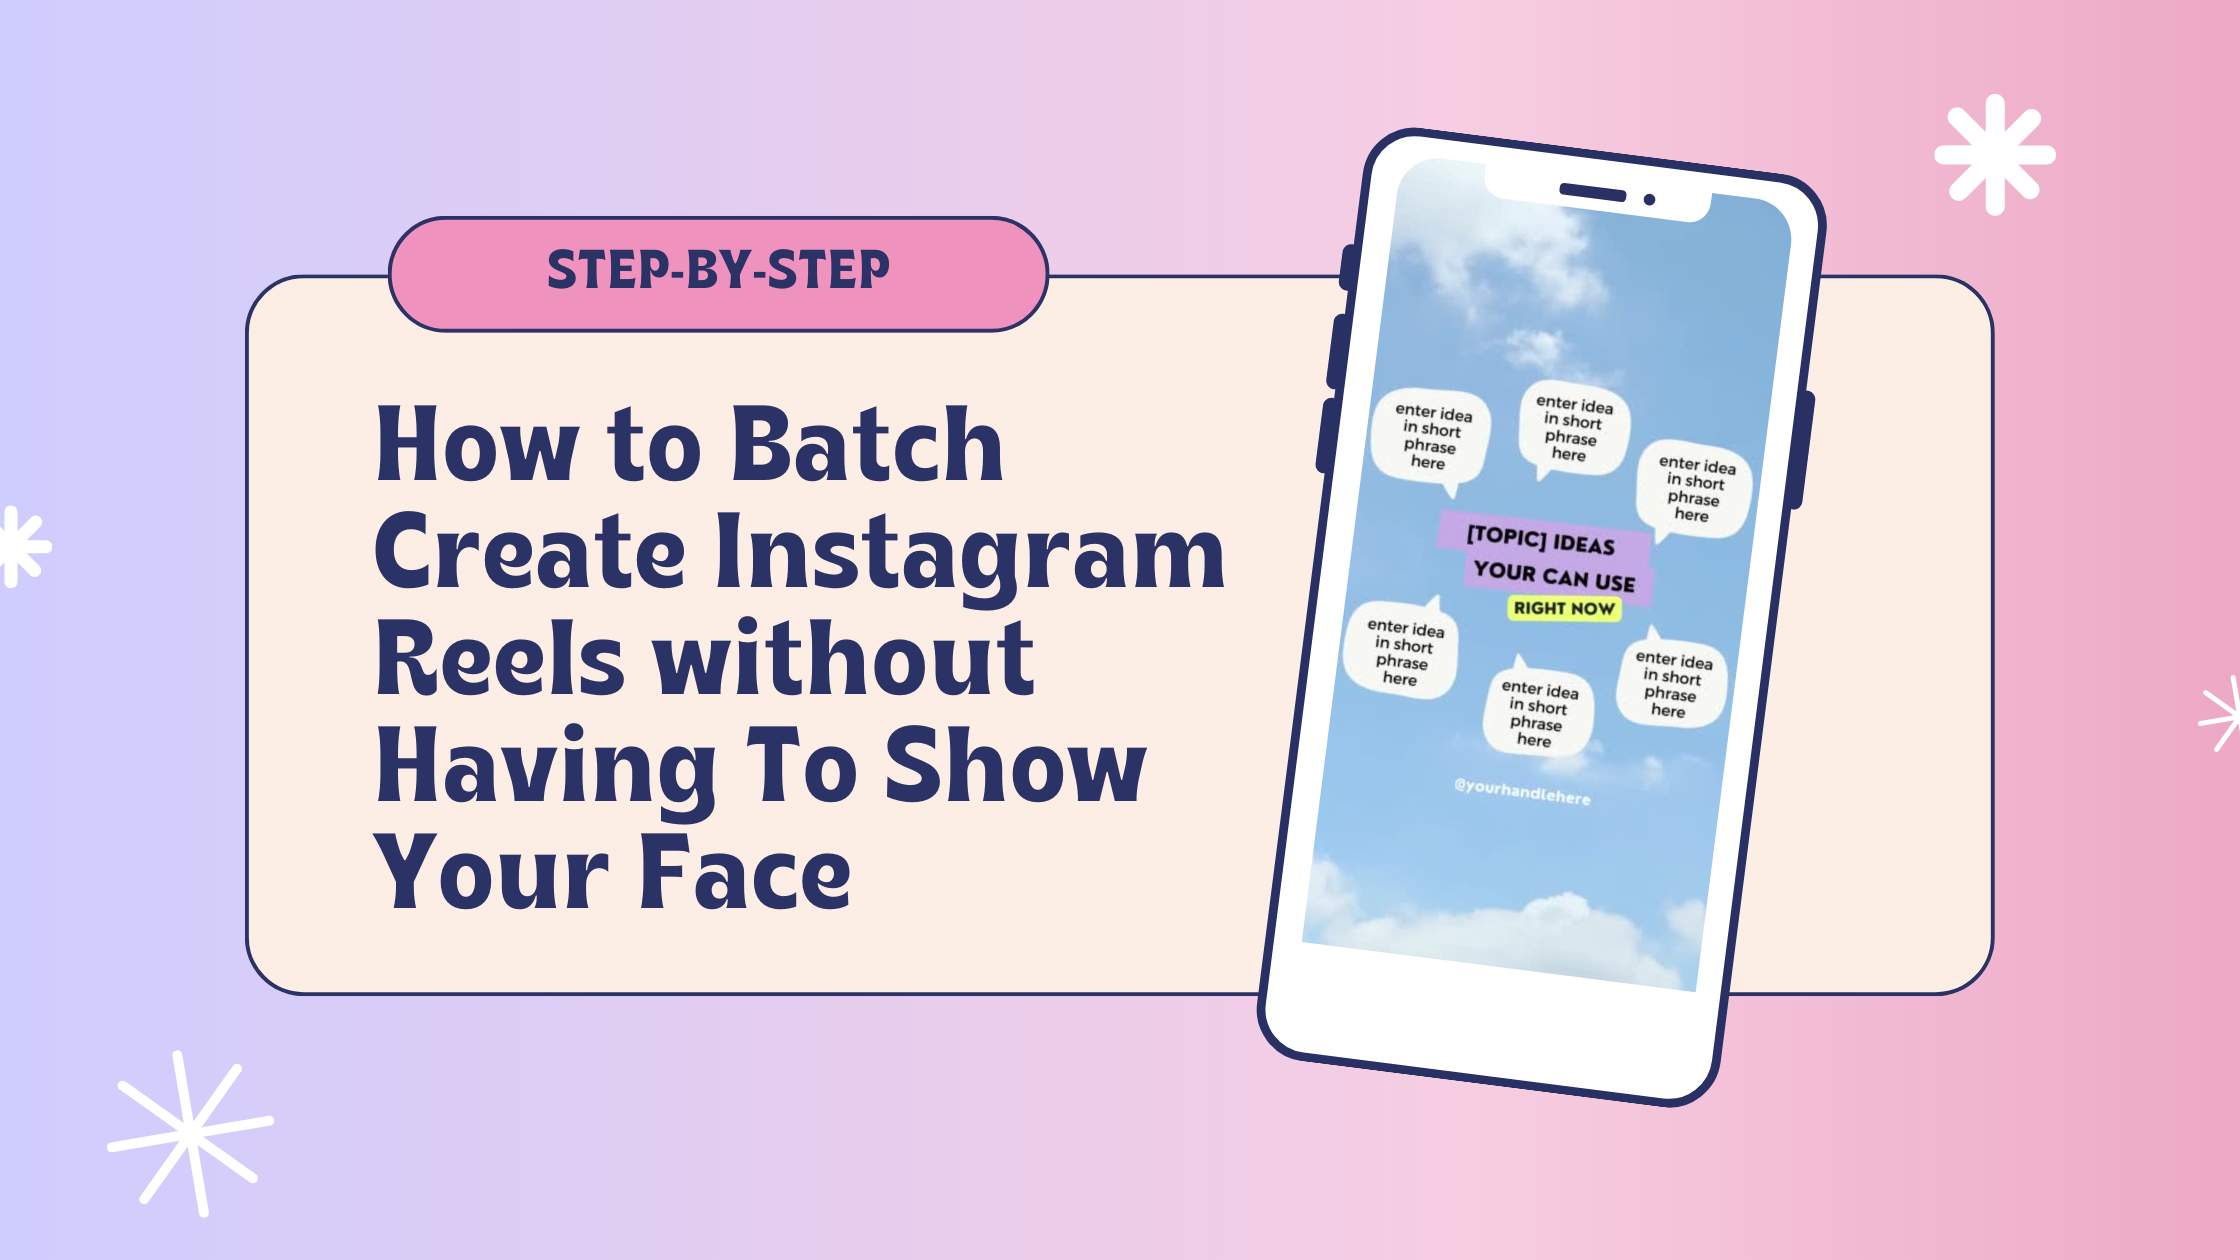 How to Batch Create Instagram Reels without Having To Show Your